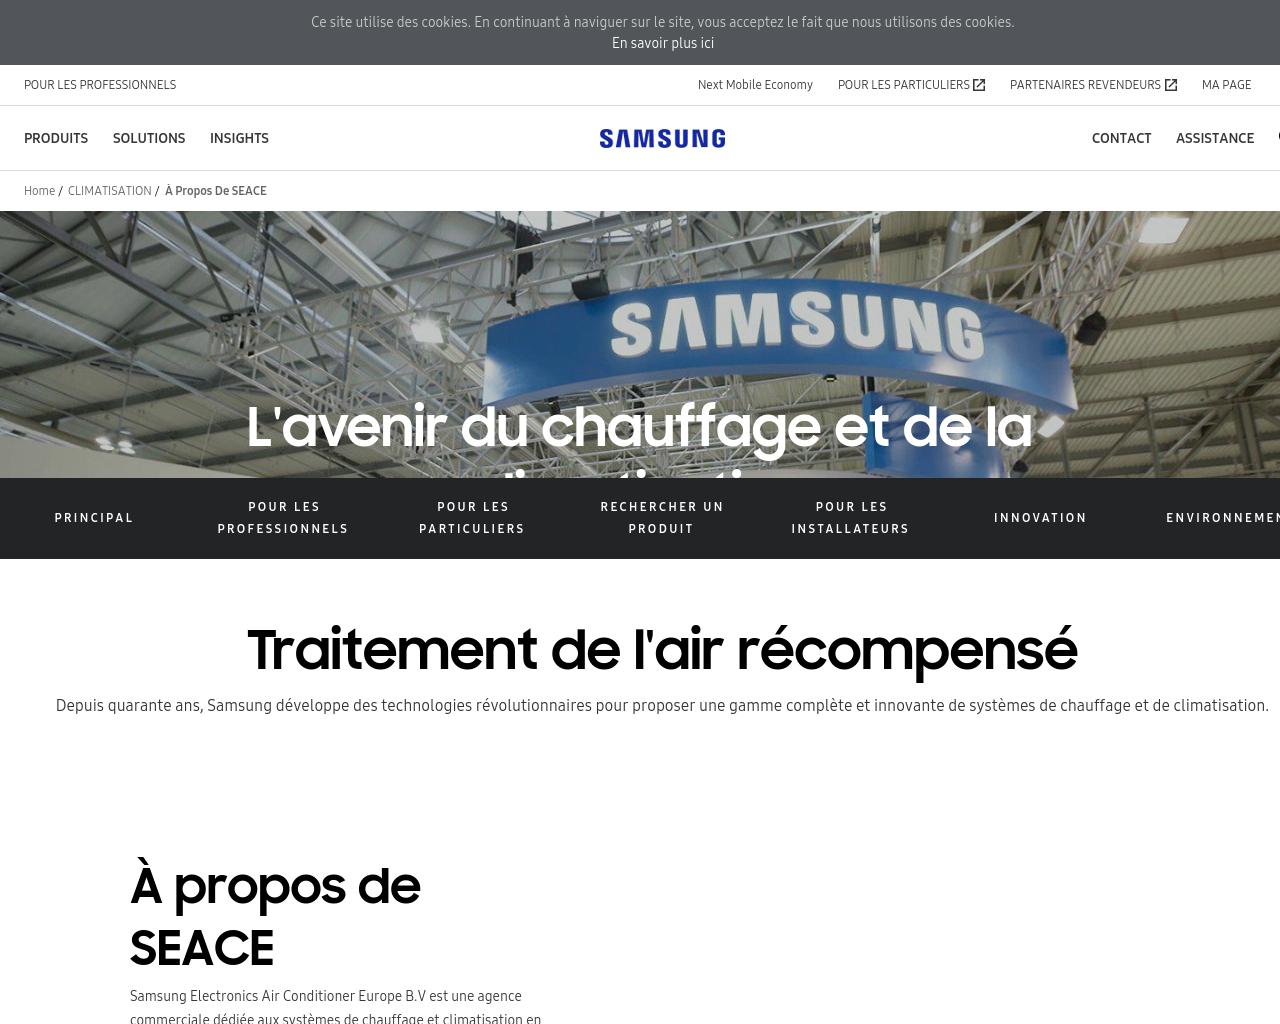 SAMSUNG ELECTRONICS AIRCONDITIONER EUROPE BV